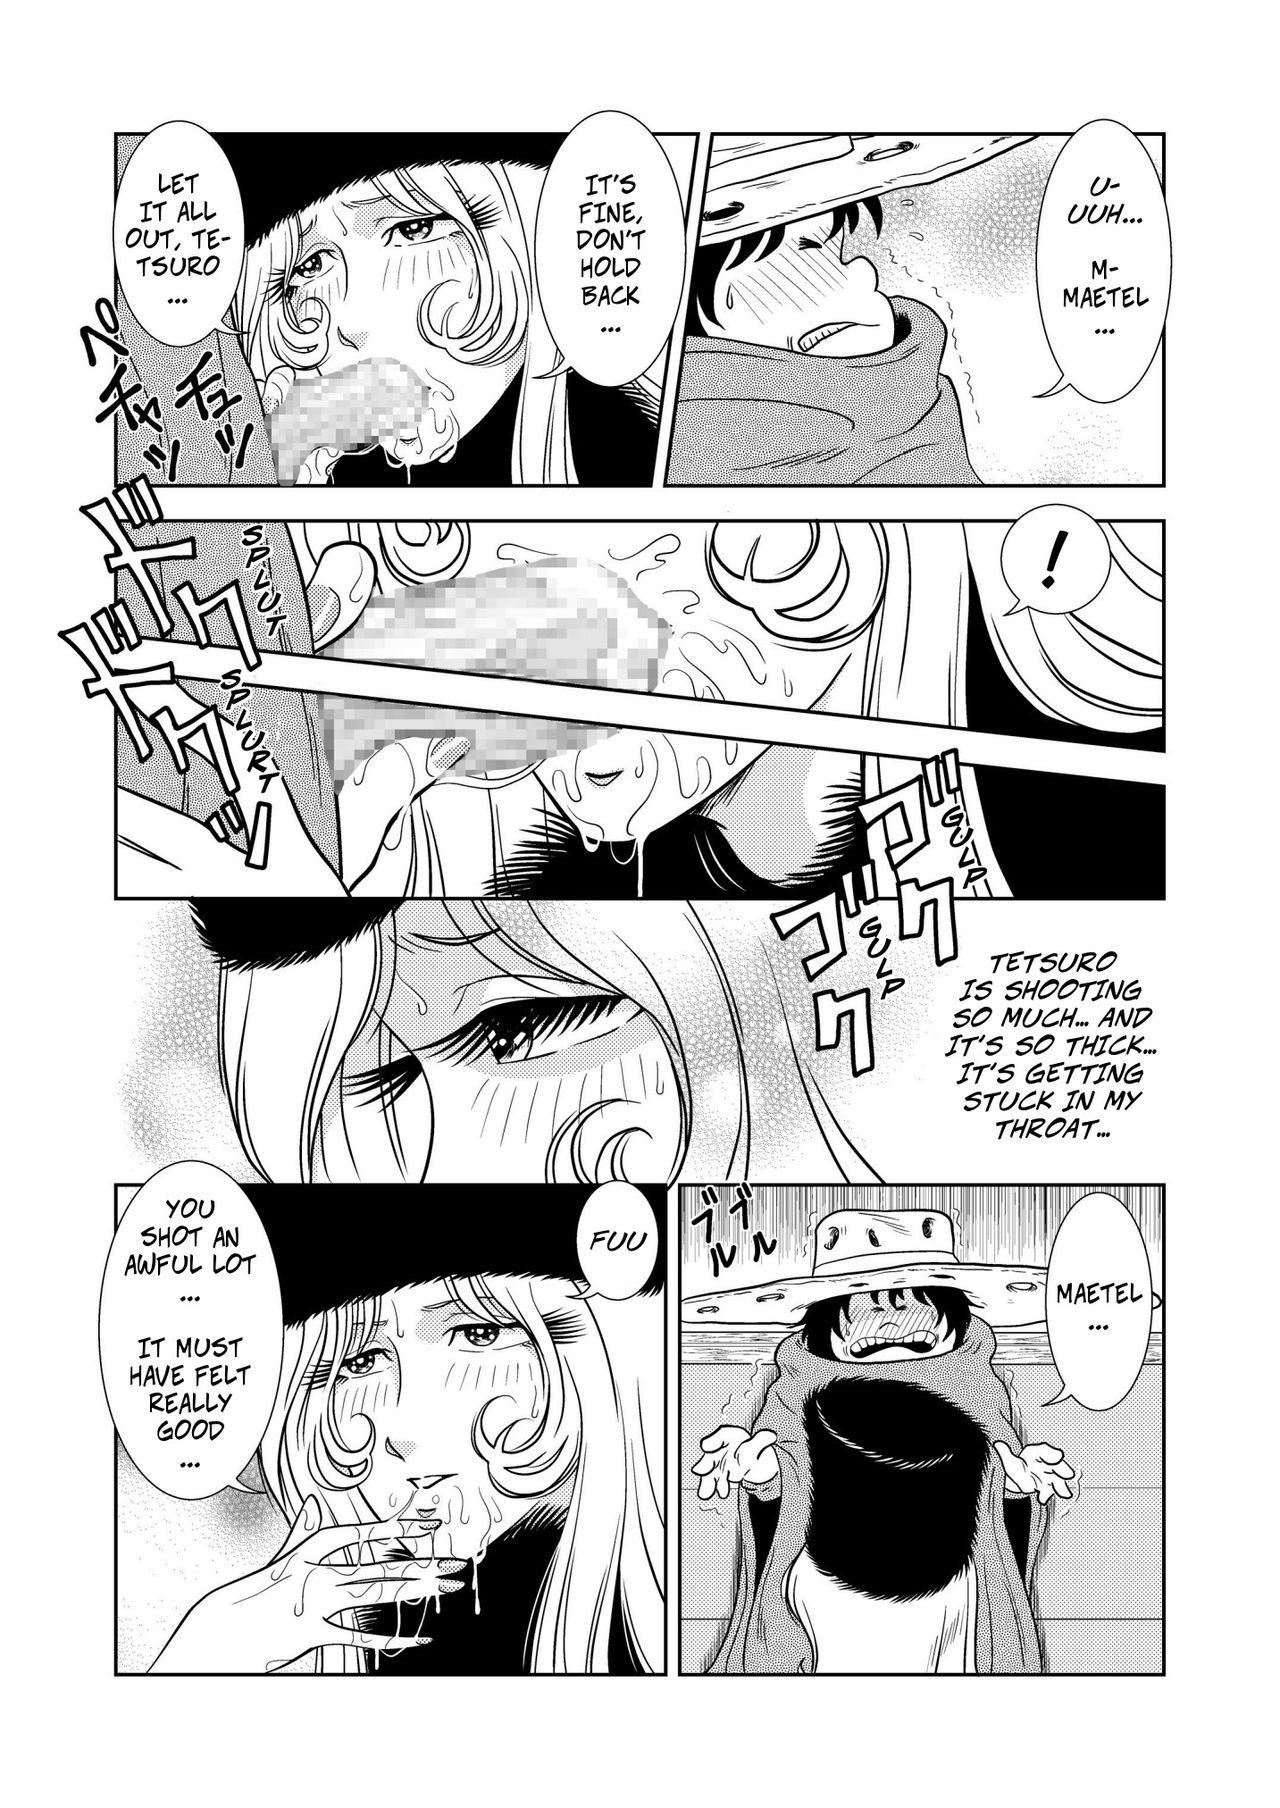 Sloppy Blow Job Maetel Story 2 - Galaxy express 999 Cumload - Page 10